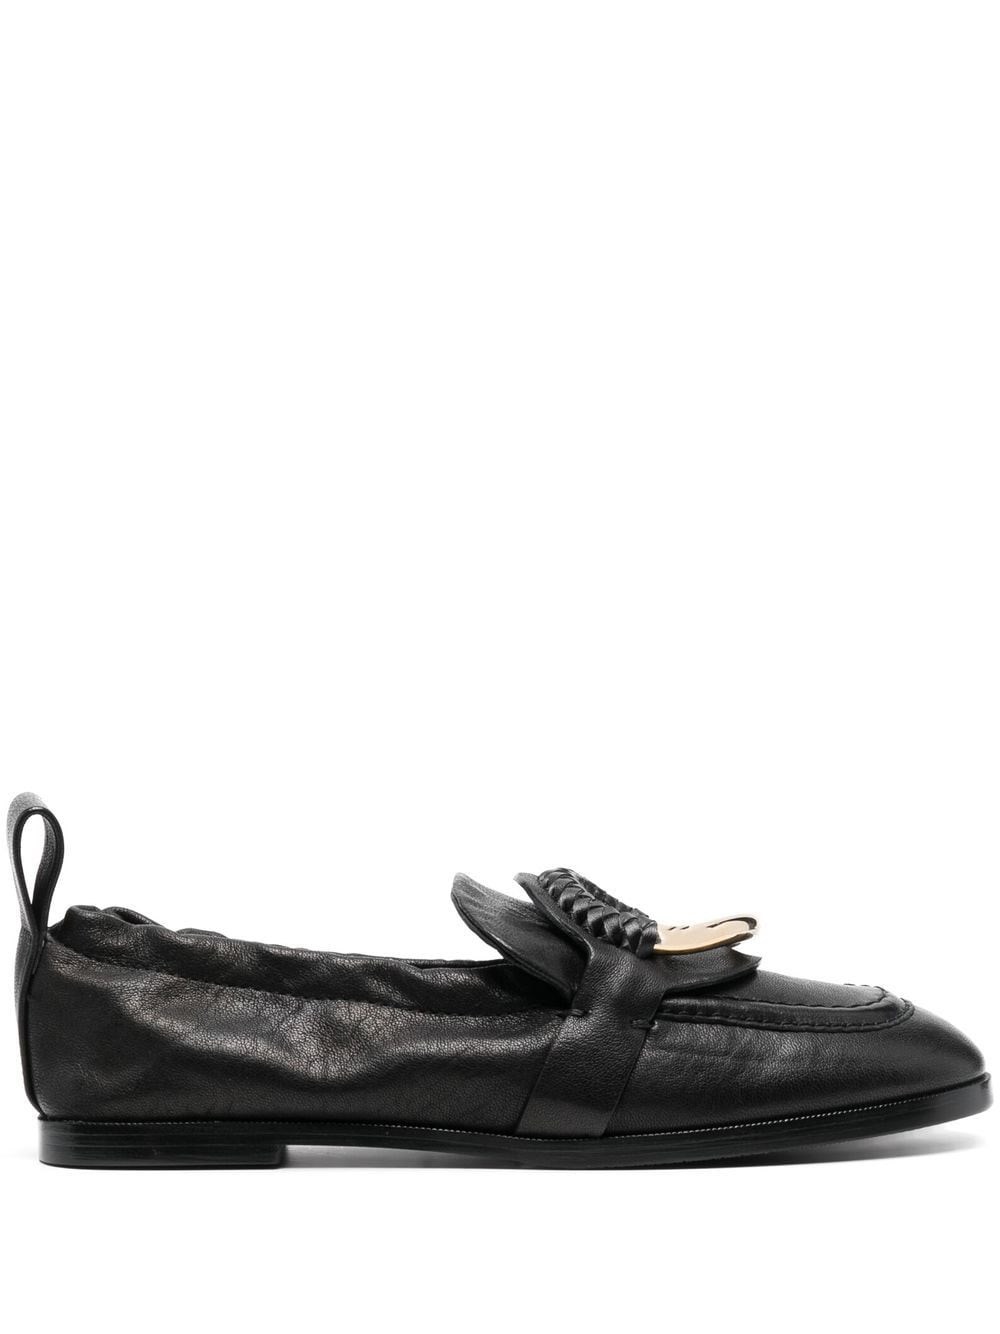 SEE BY CHLOÉ LEATHER LOAFERS